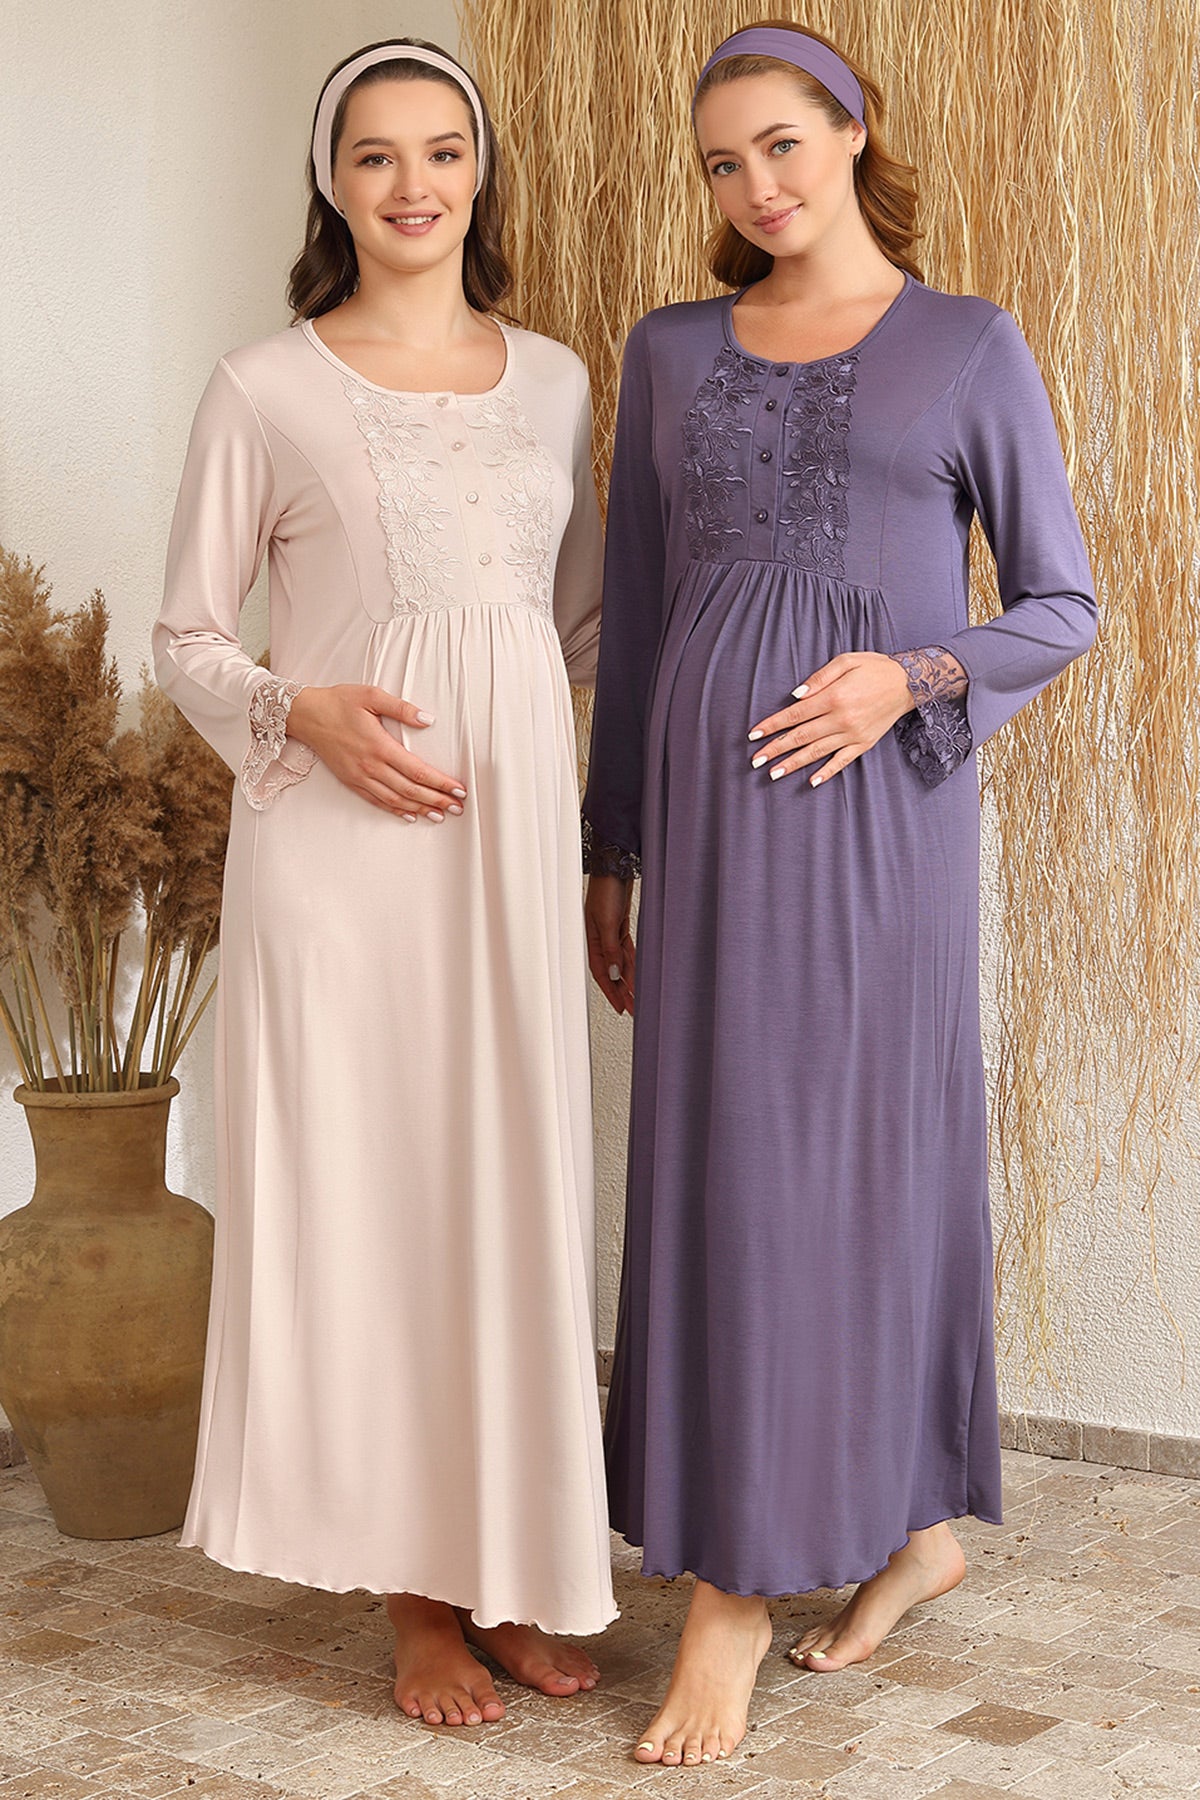 Lace Sleeve Maternity & Nursing Nightgown - 4426